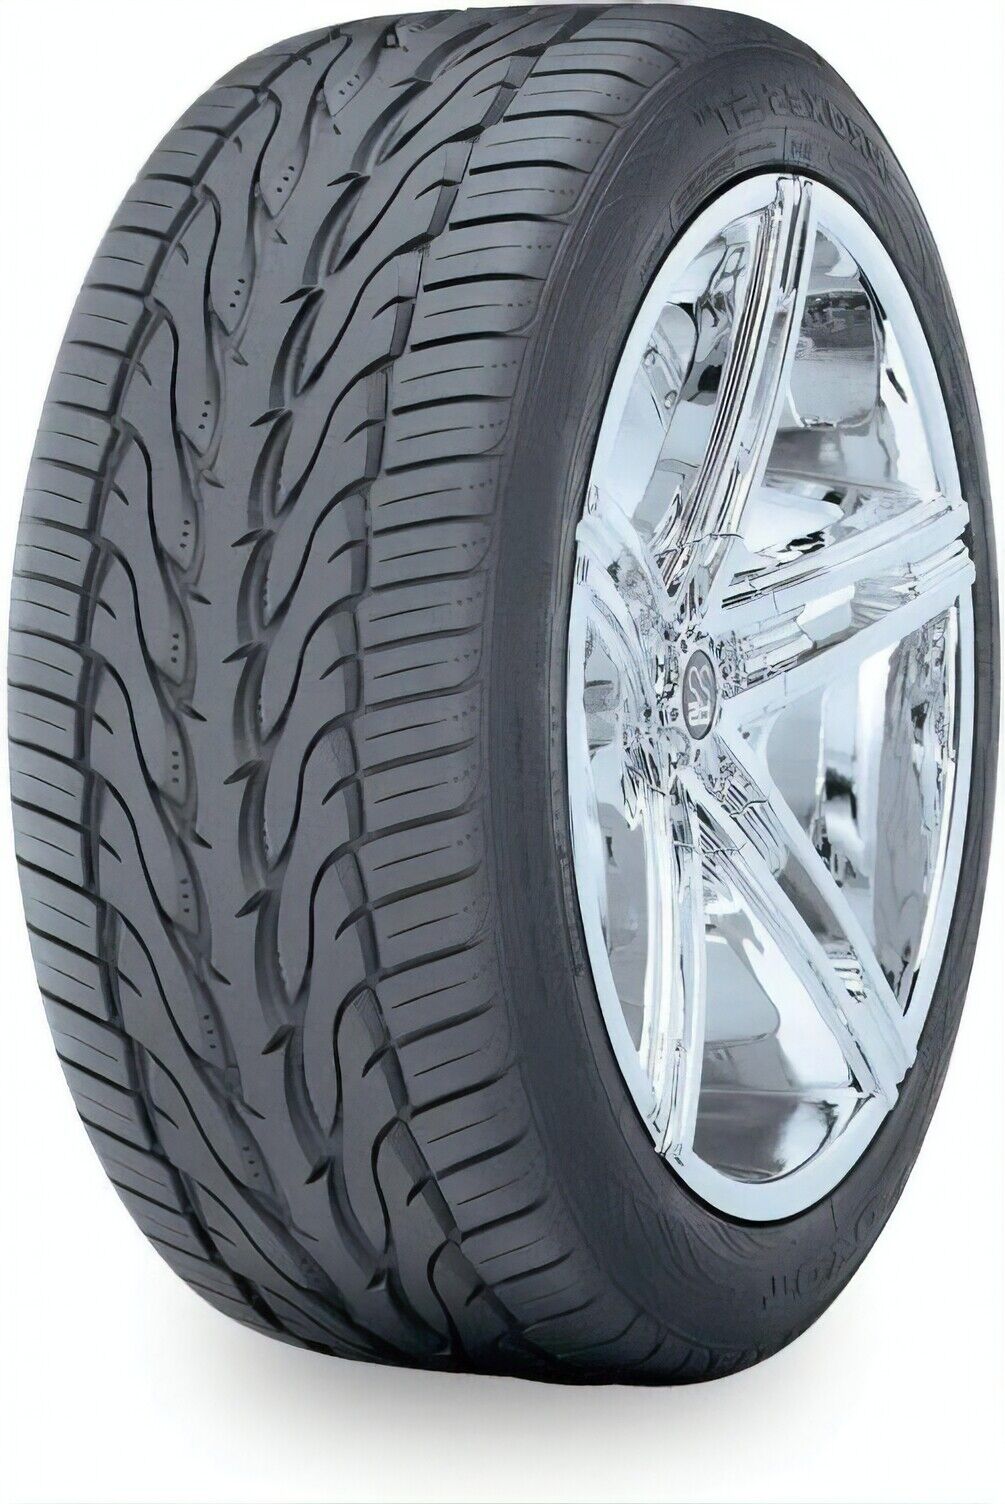 265/45/22 Toyo Tire Proxes ST II BRAND NEW TireS